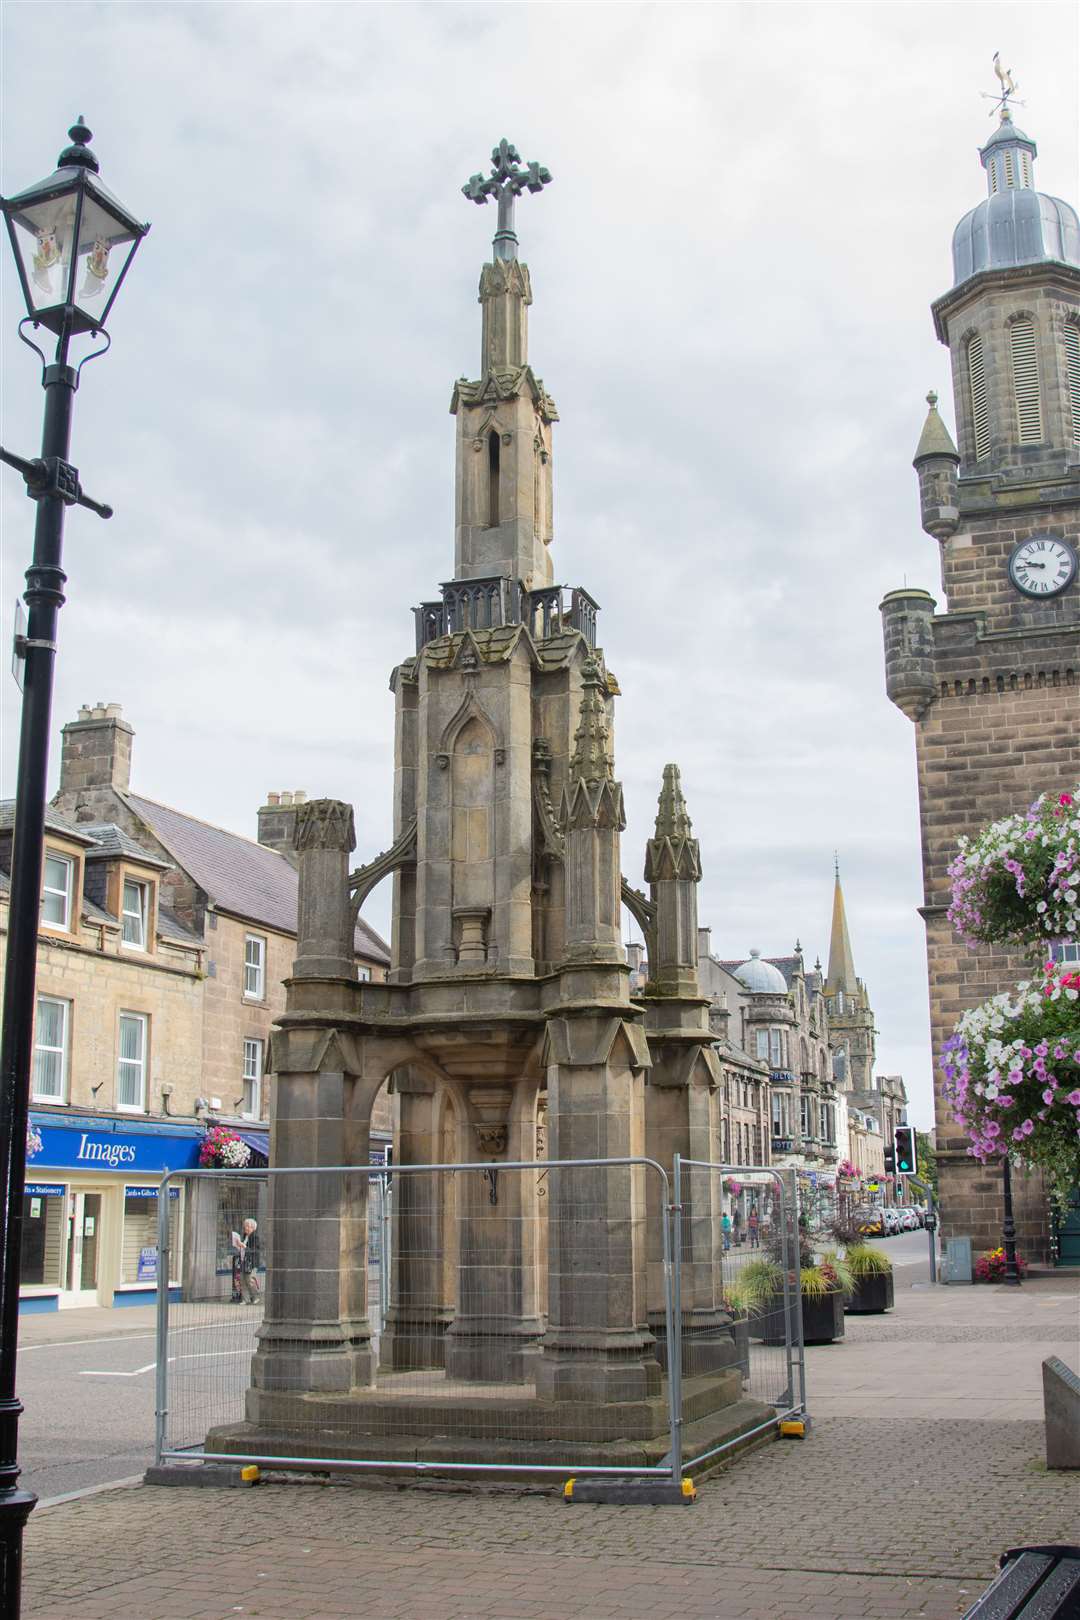 Forres landmark - The Market Cross - in the centre of the High Street has been sealed off after concerns were raised over falling stonework...Picture: Daniel Forsyth. Image No.044576.